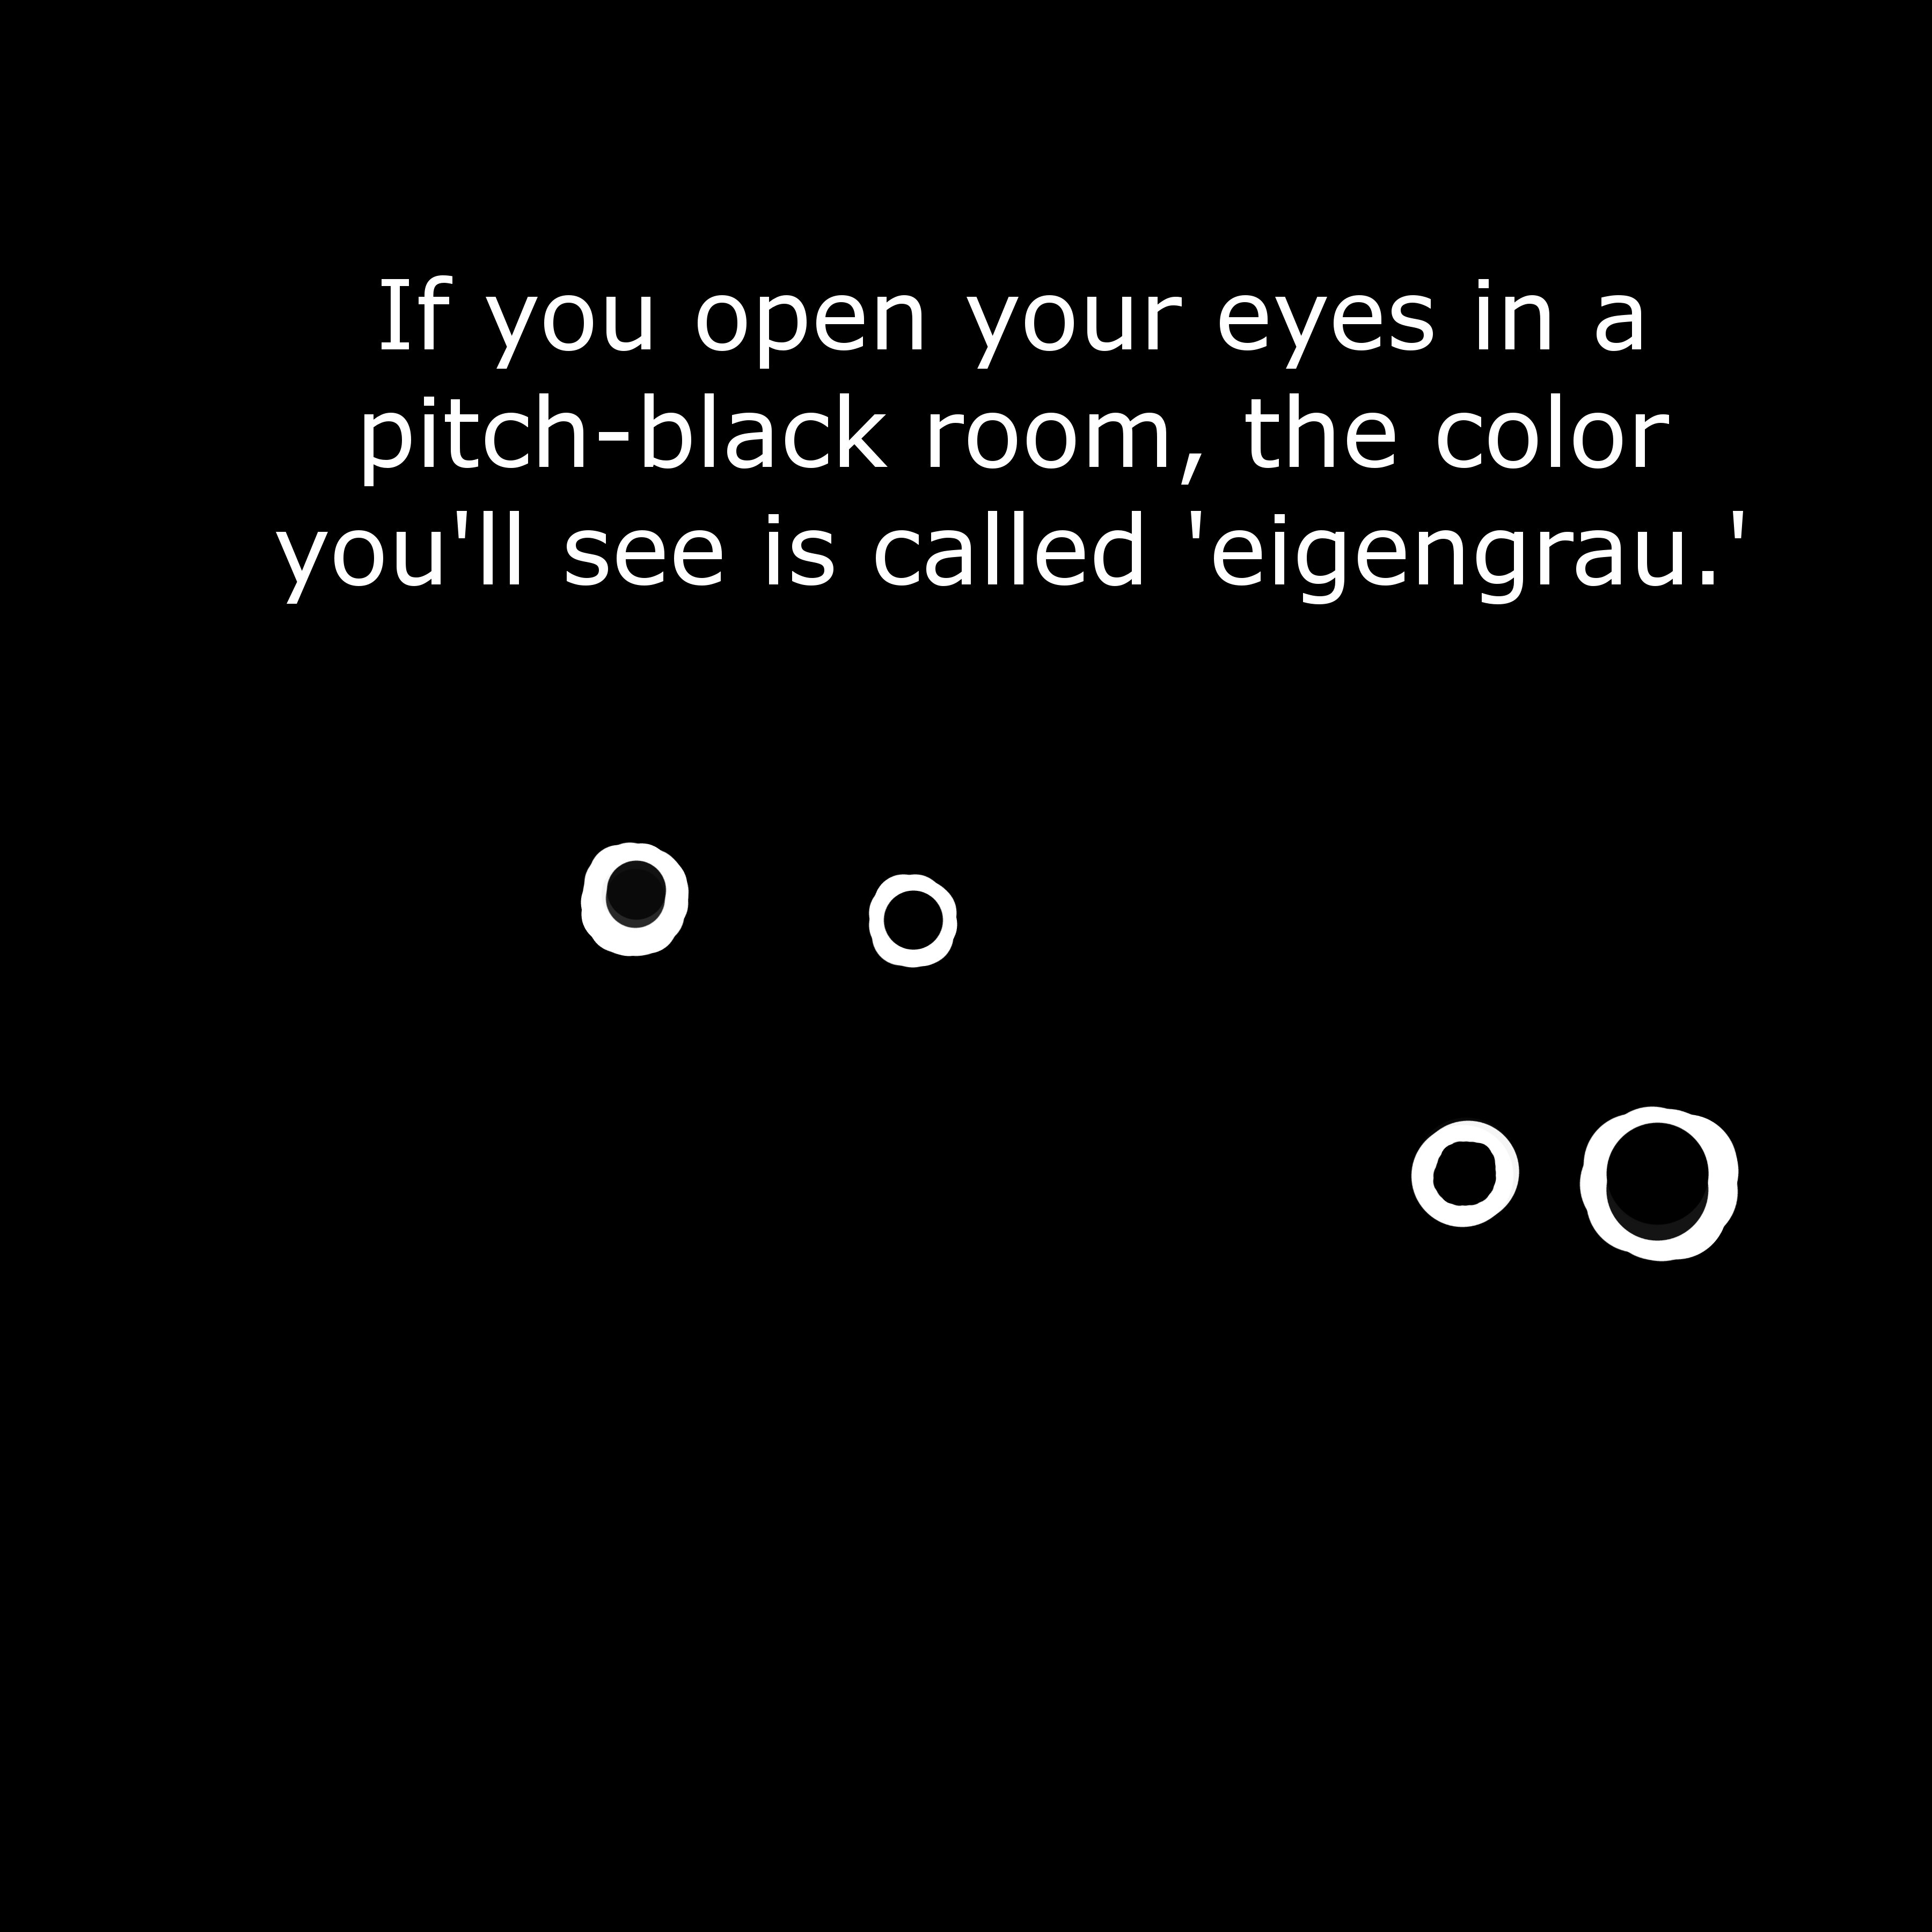 monochrome - If you open your eyes in a pitchblack room, the color you'll see is called 'eigengrau.' 0 0 O O